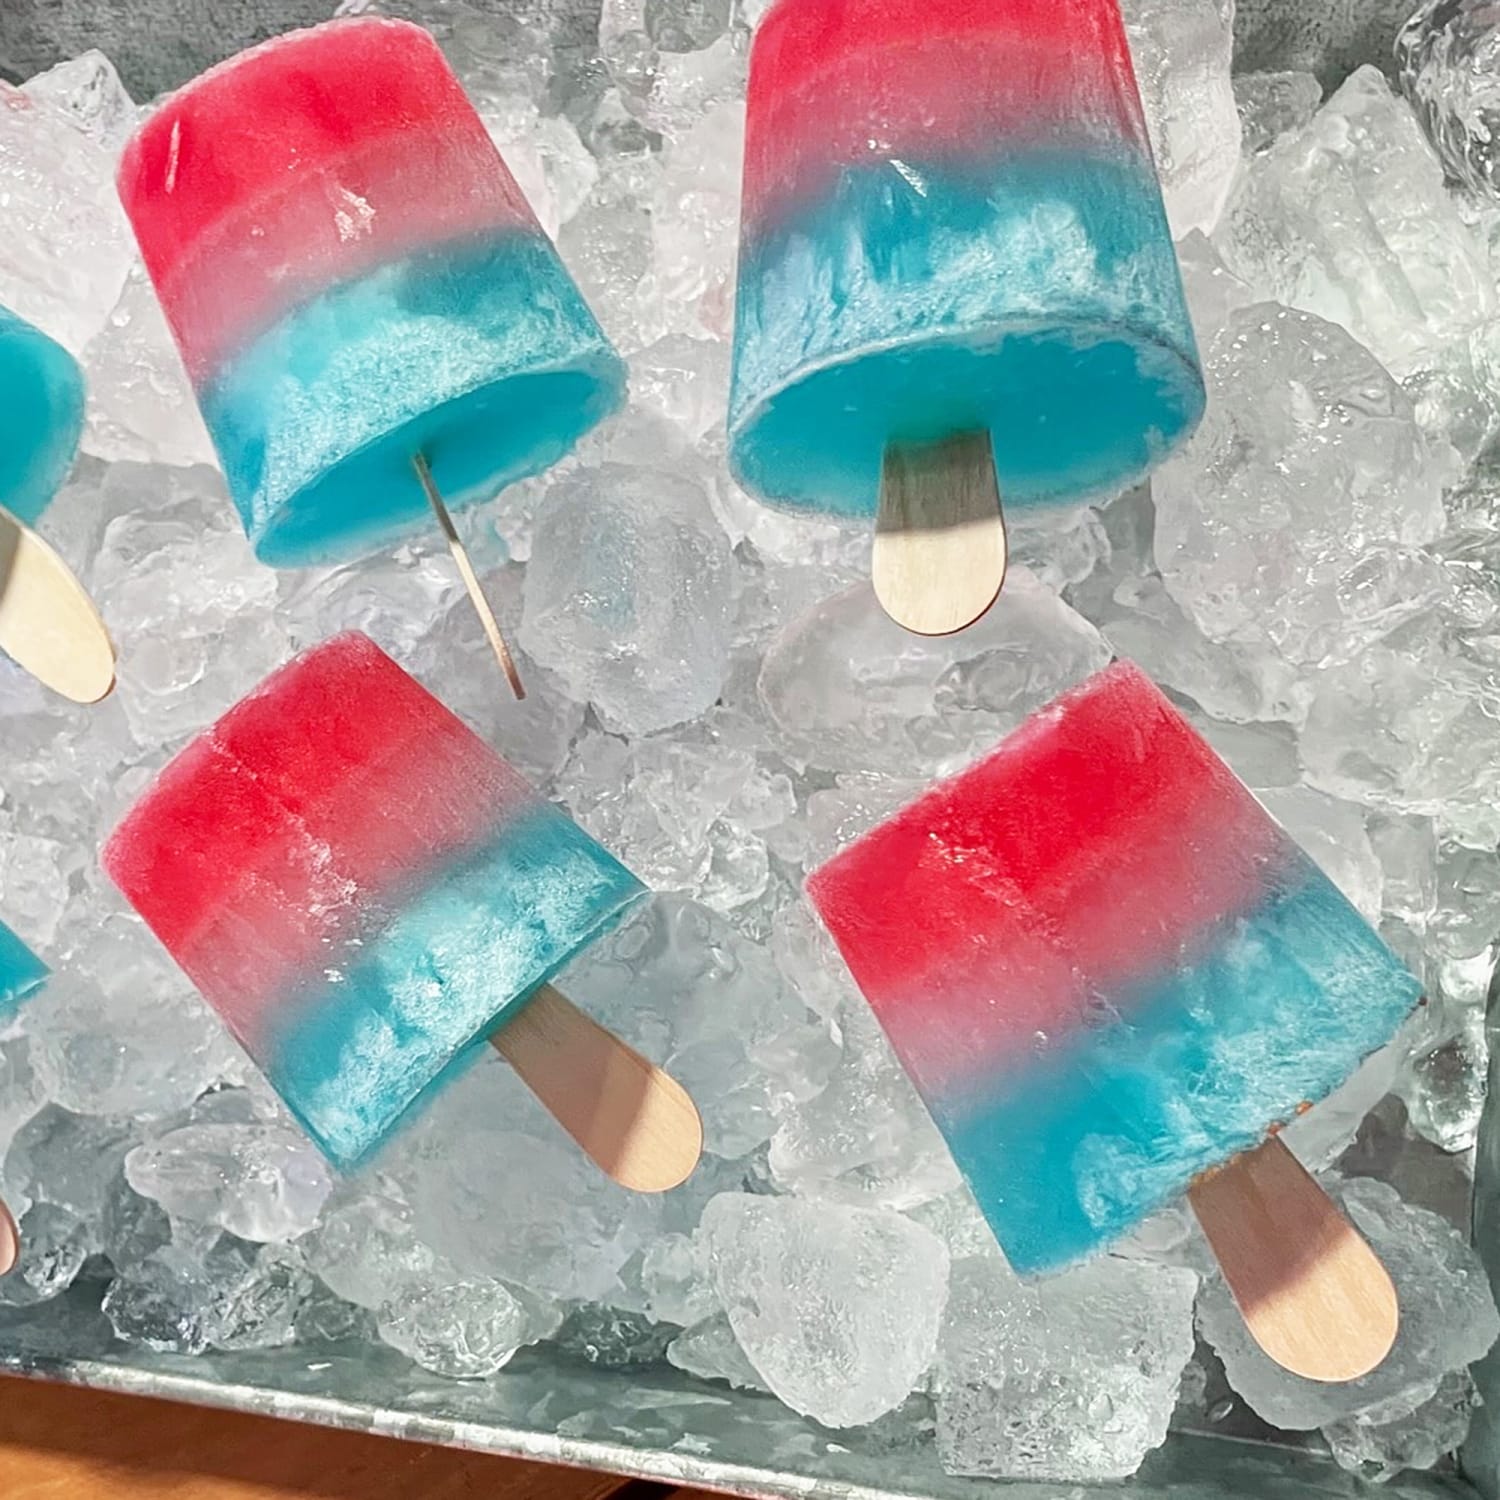 Red, White, and Blue Ice Cubes